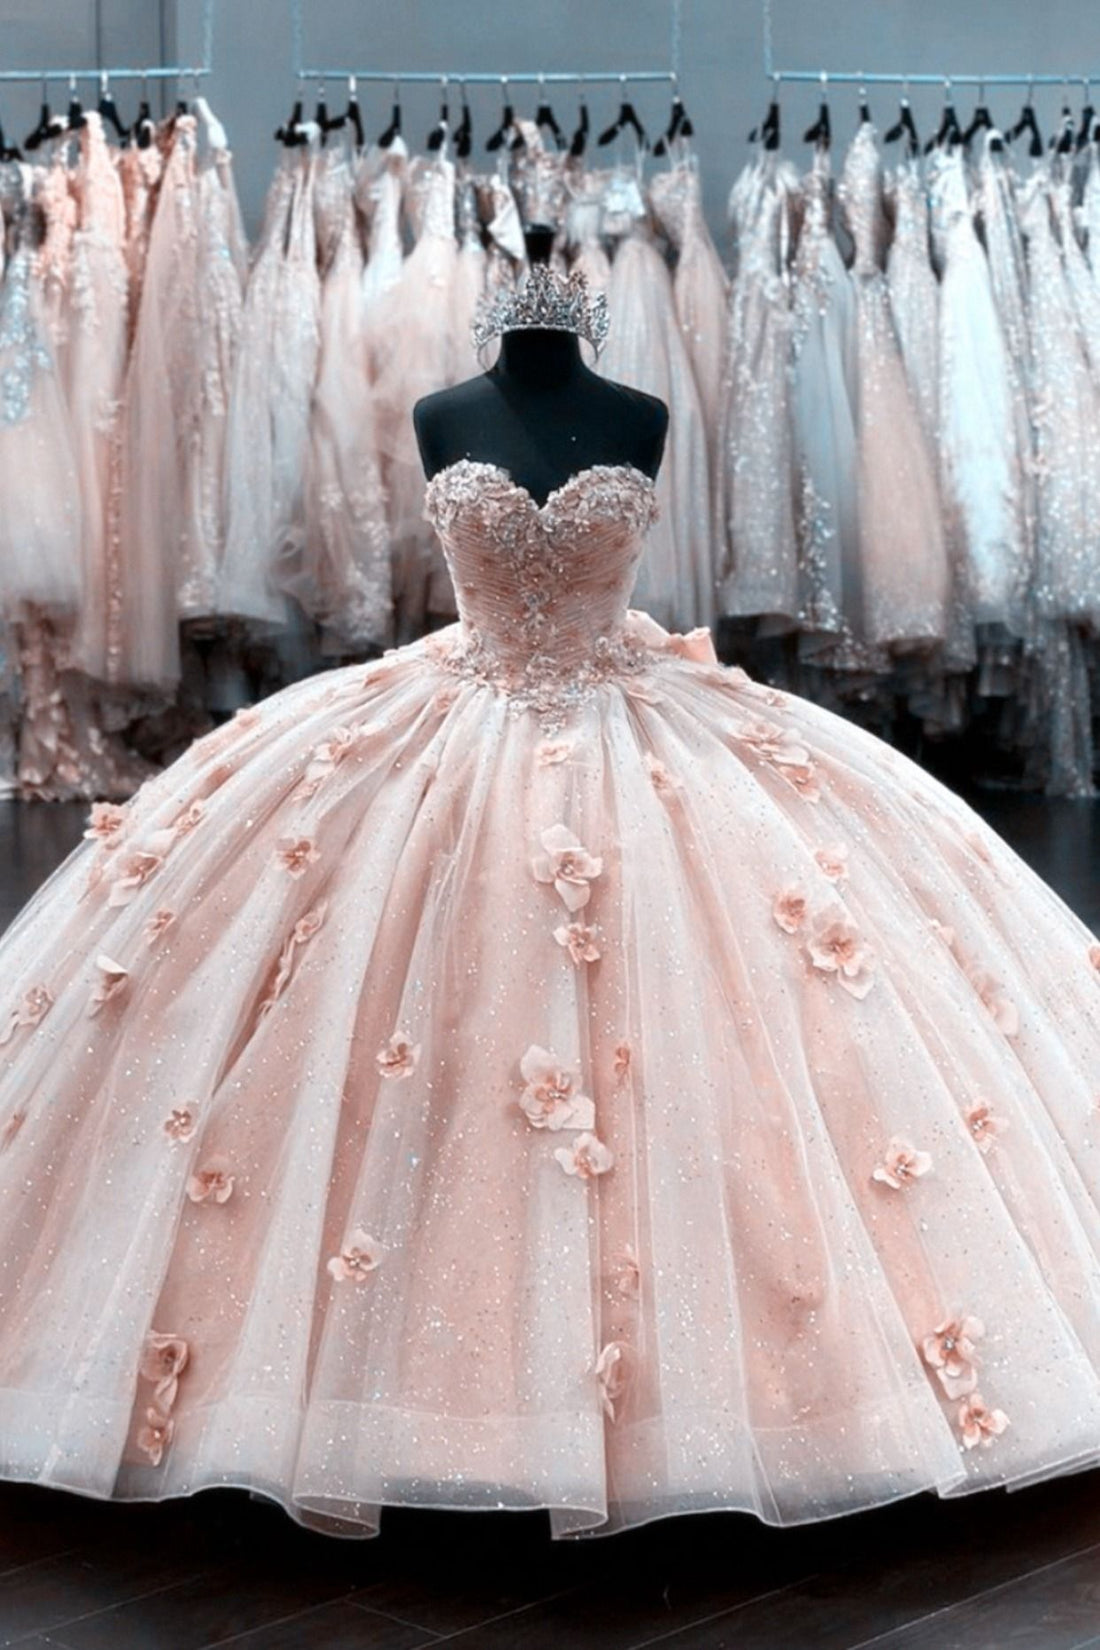 Light Pink Ball Gown Dress For 15th Birthday